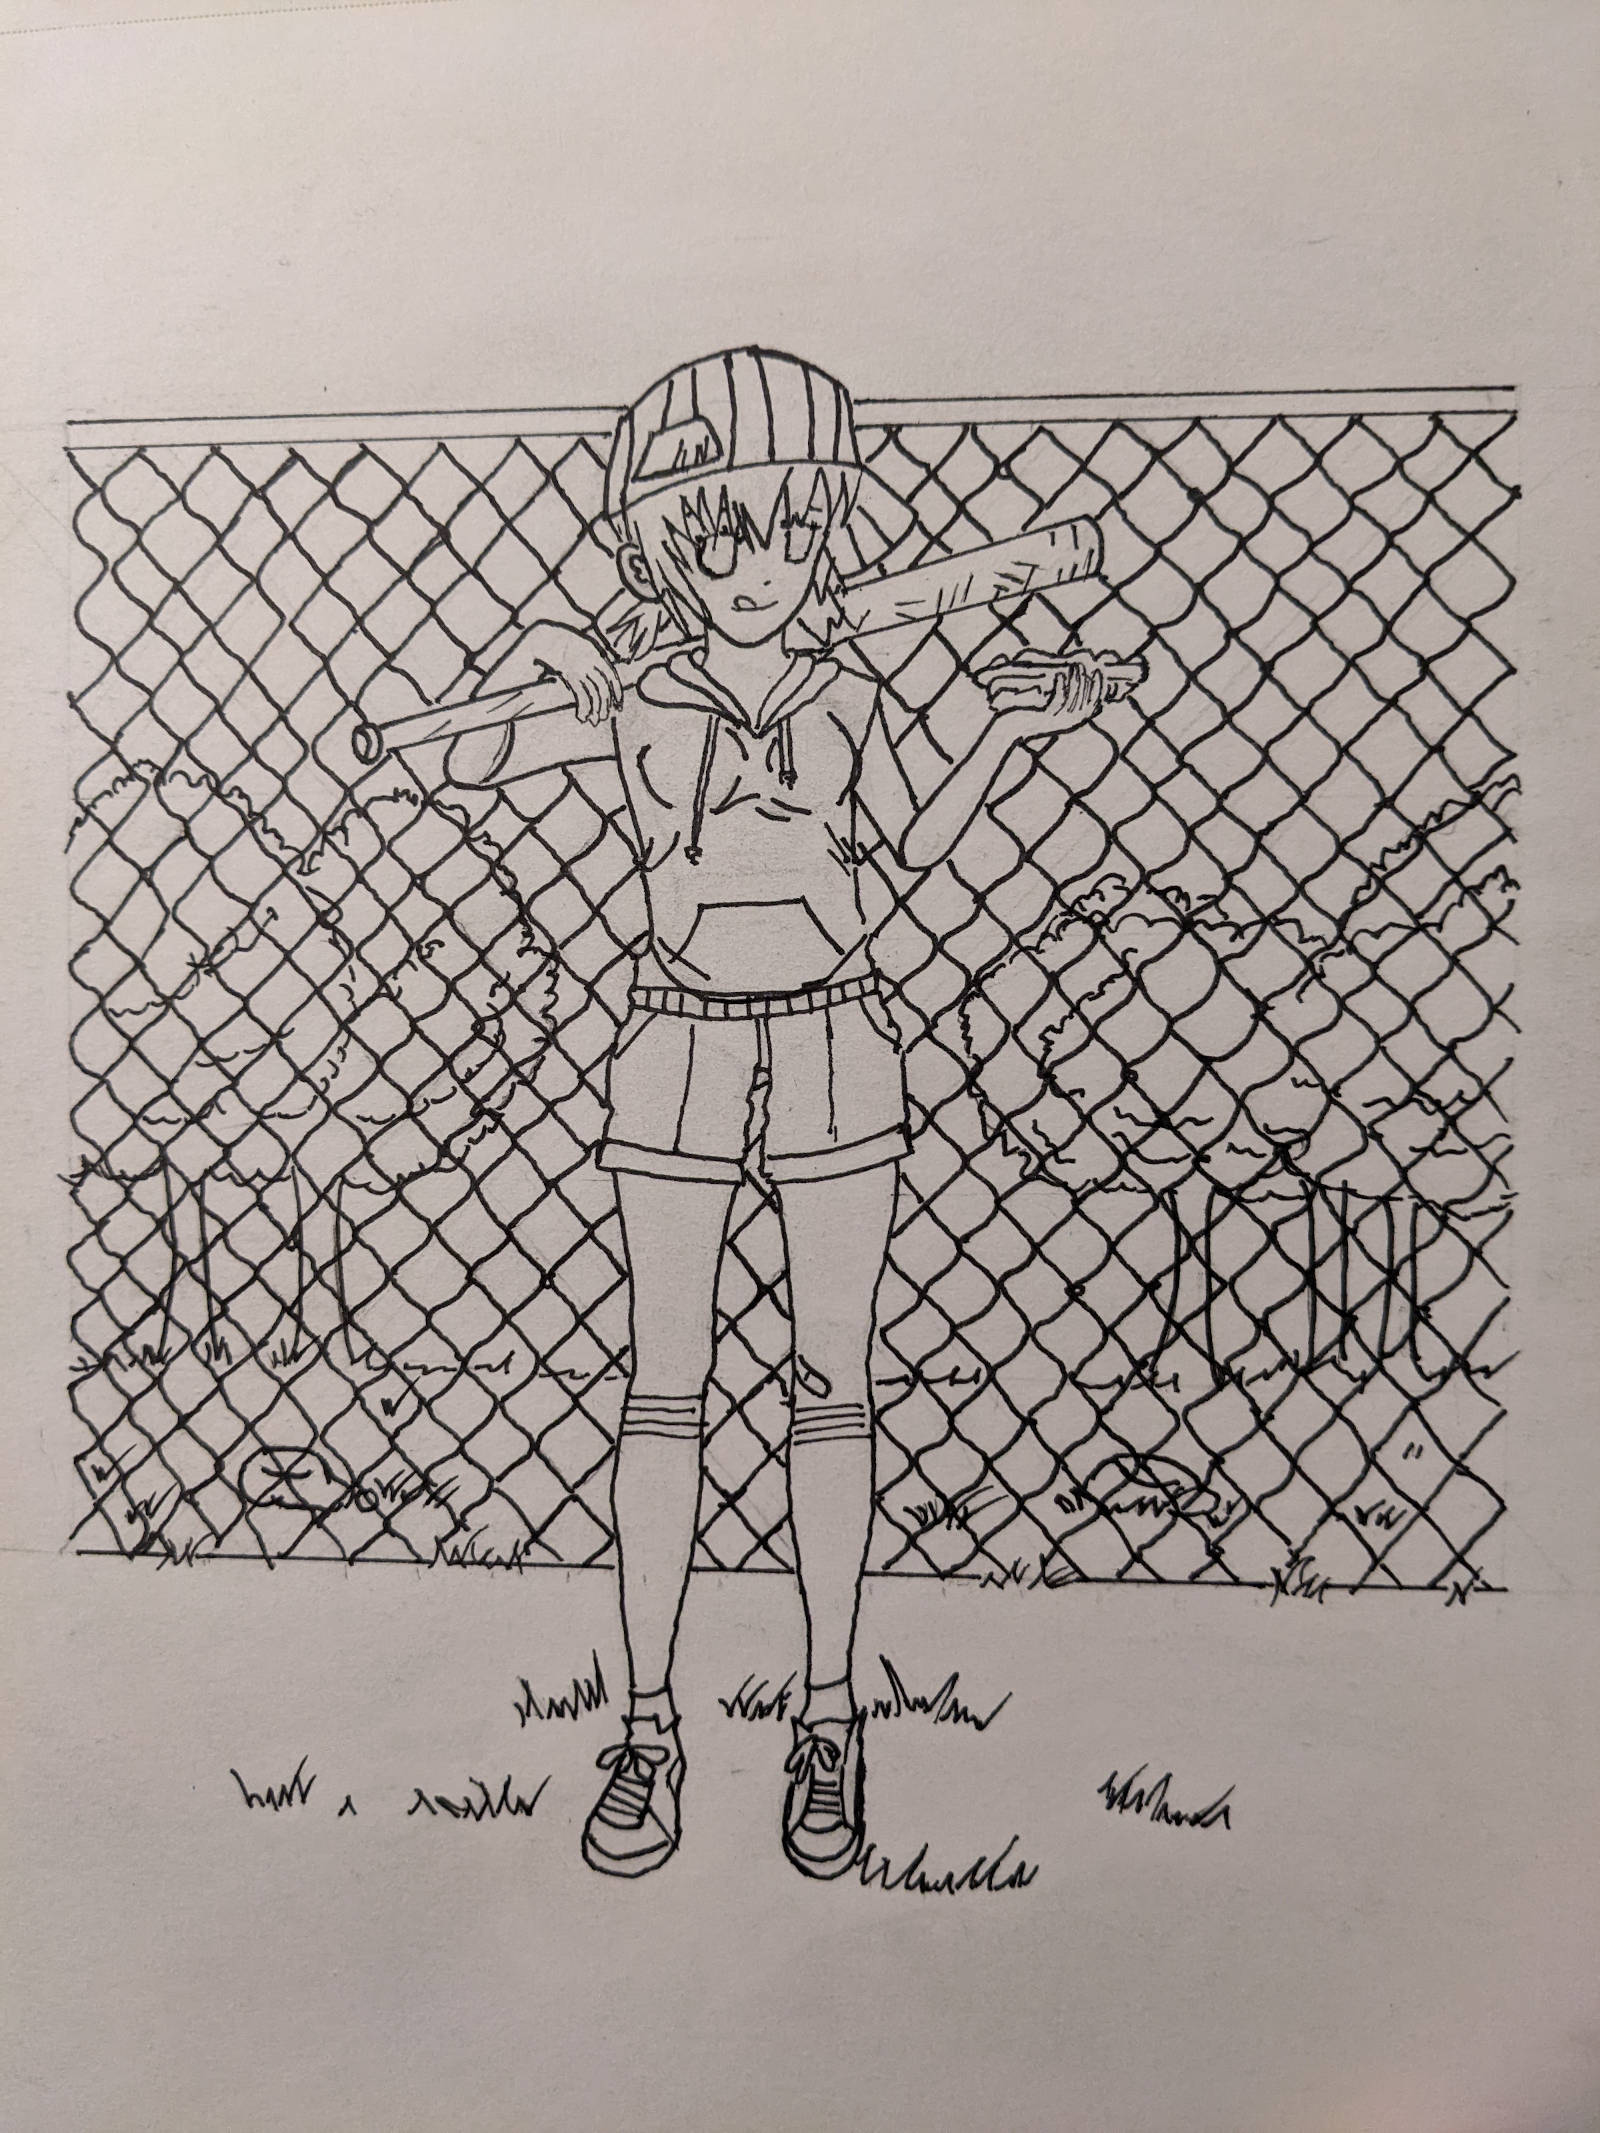 Girl holding a softball bat over her shoulder. In her left hand, holding a hotdog. She is standing in front of a chain-linked fence with trees in the background. Black and white.